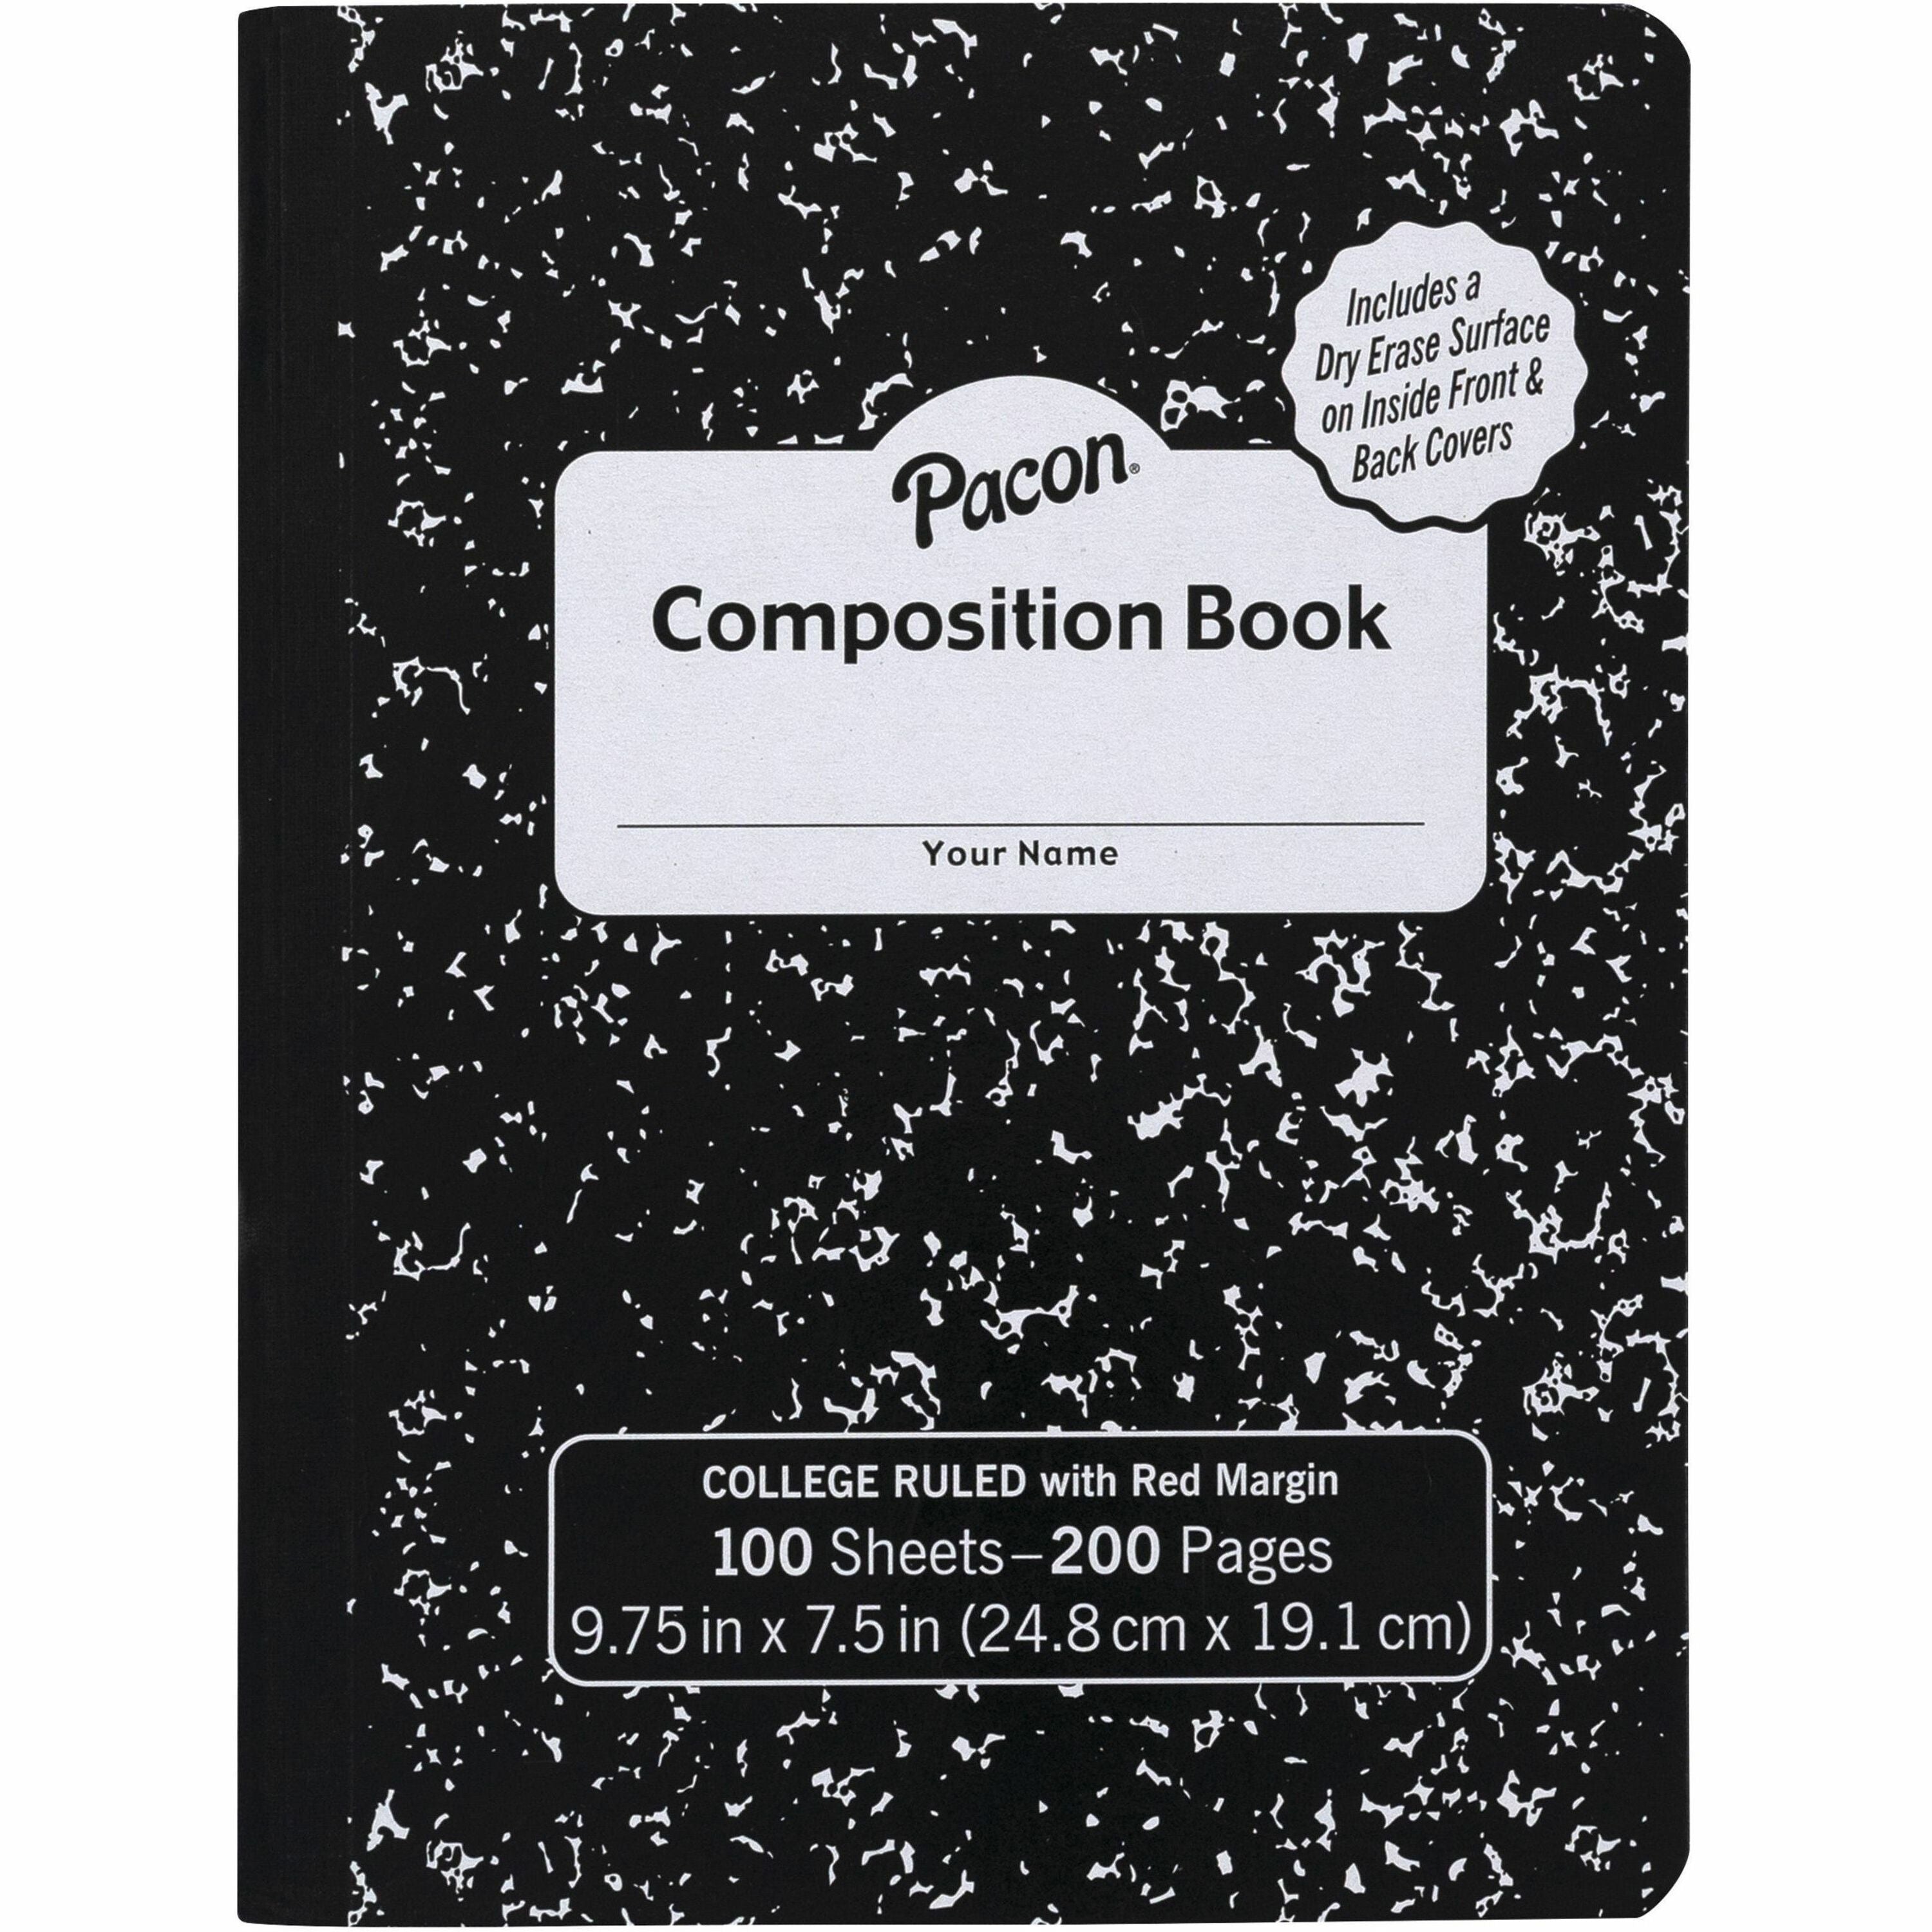 pacon-marble-hard-cover-college-rule-composition-book-100-sheets-200-pages-college-ruled-red-margin-975-x-75-black-marble-cover-recyclable-hard-cover-1-each_pacpmmk37106de - 1